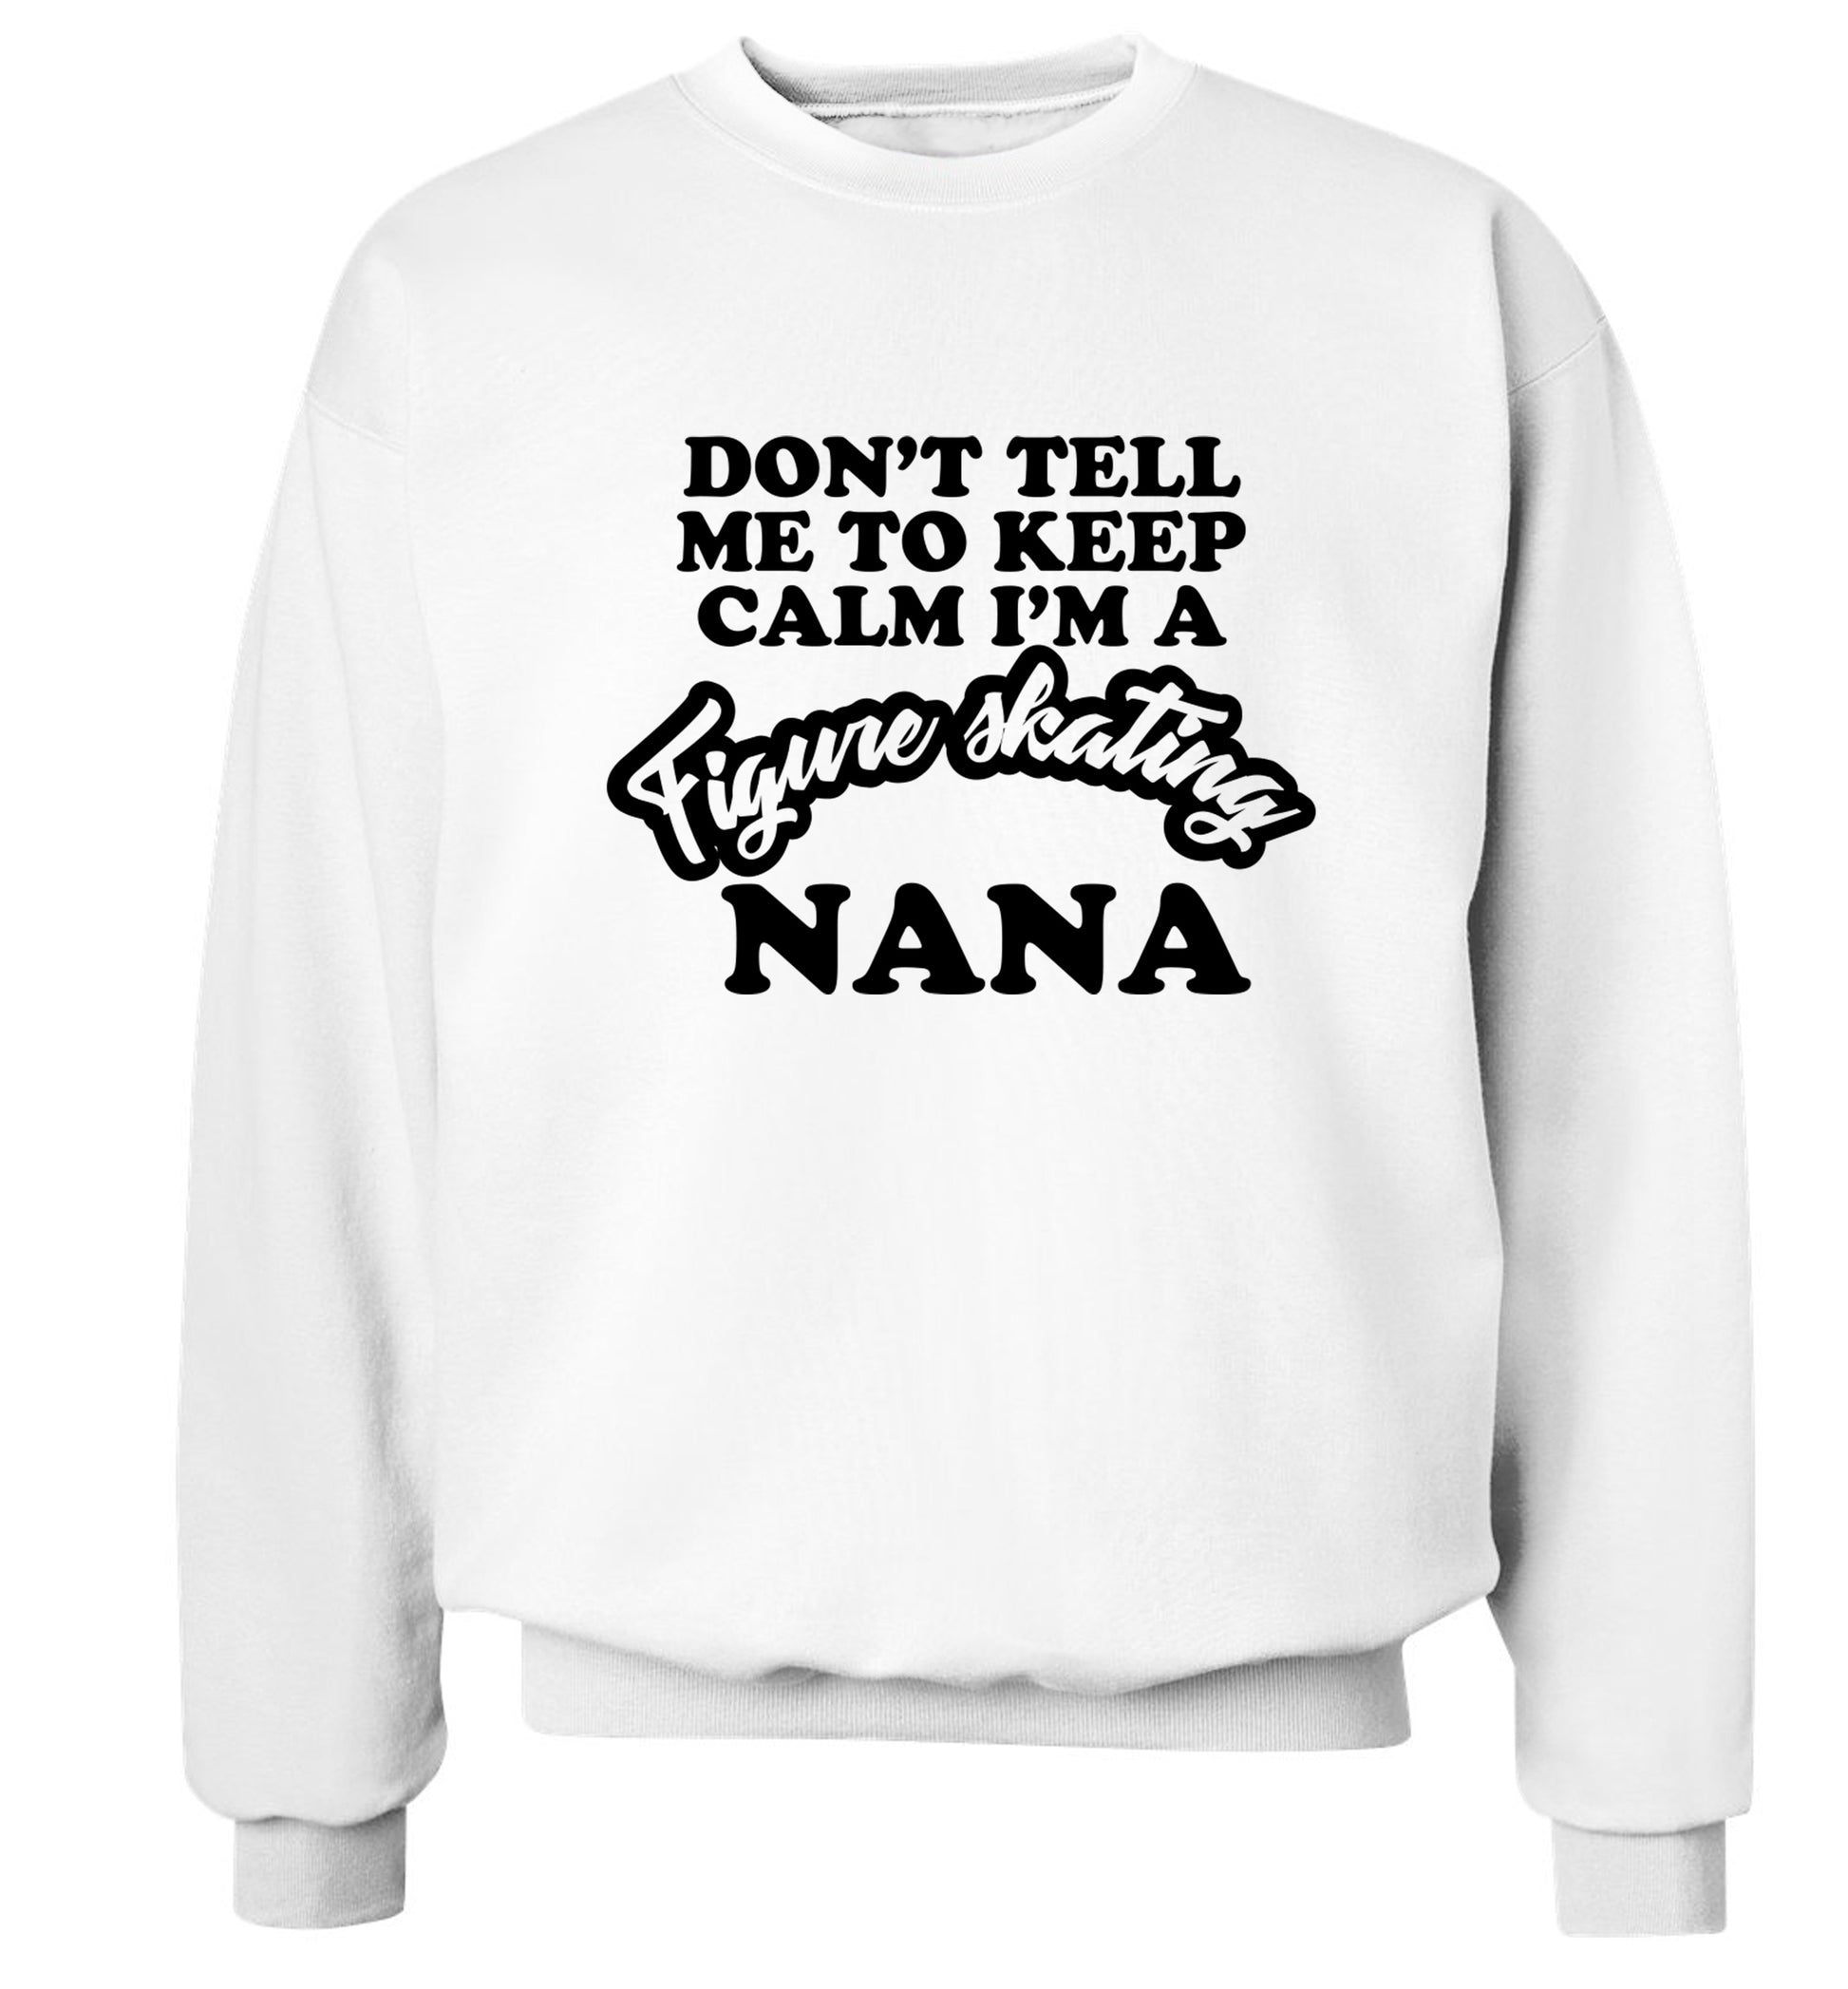 Don't tell me to keep calm I'm a figure skating nana Adult's unisexwhite Sweater 2XL